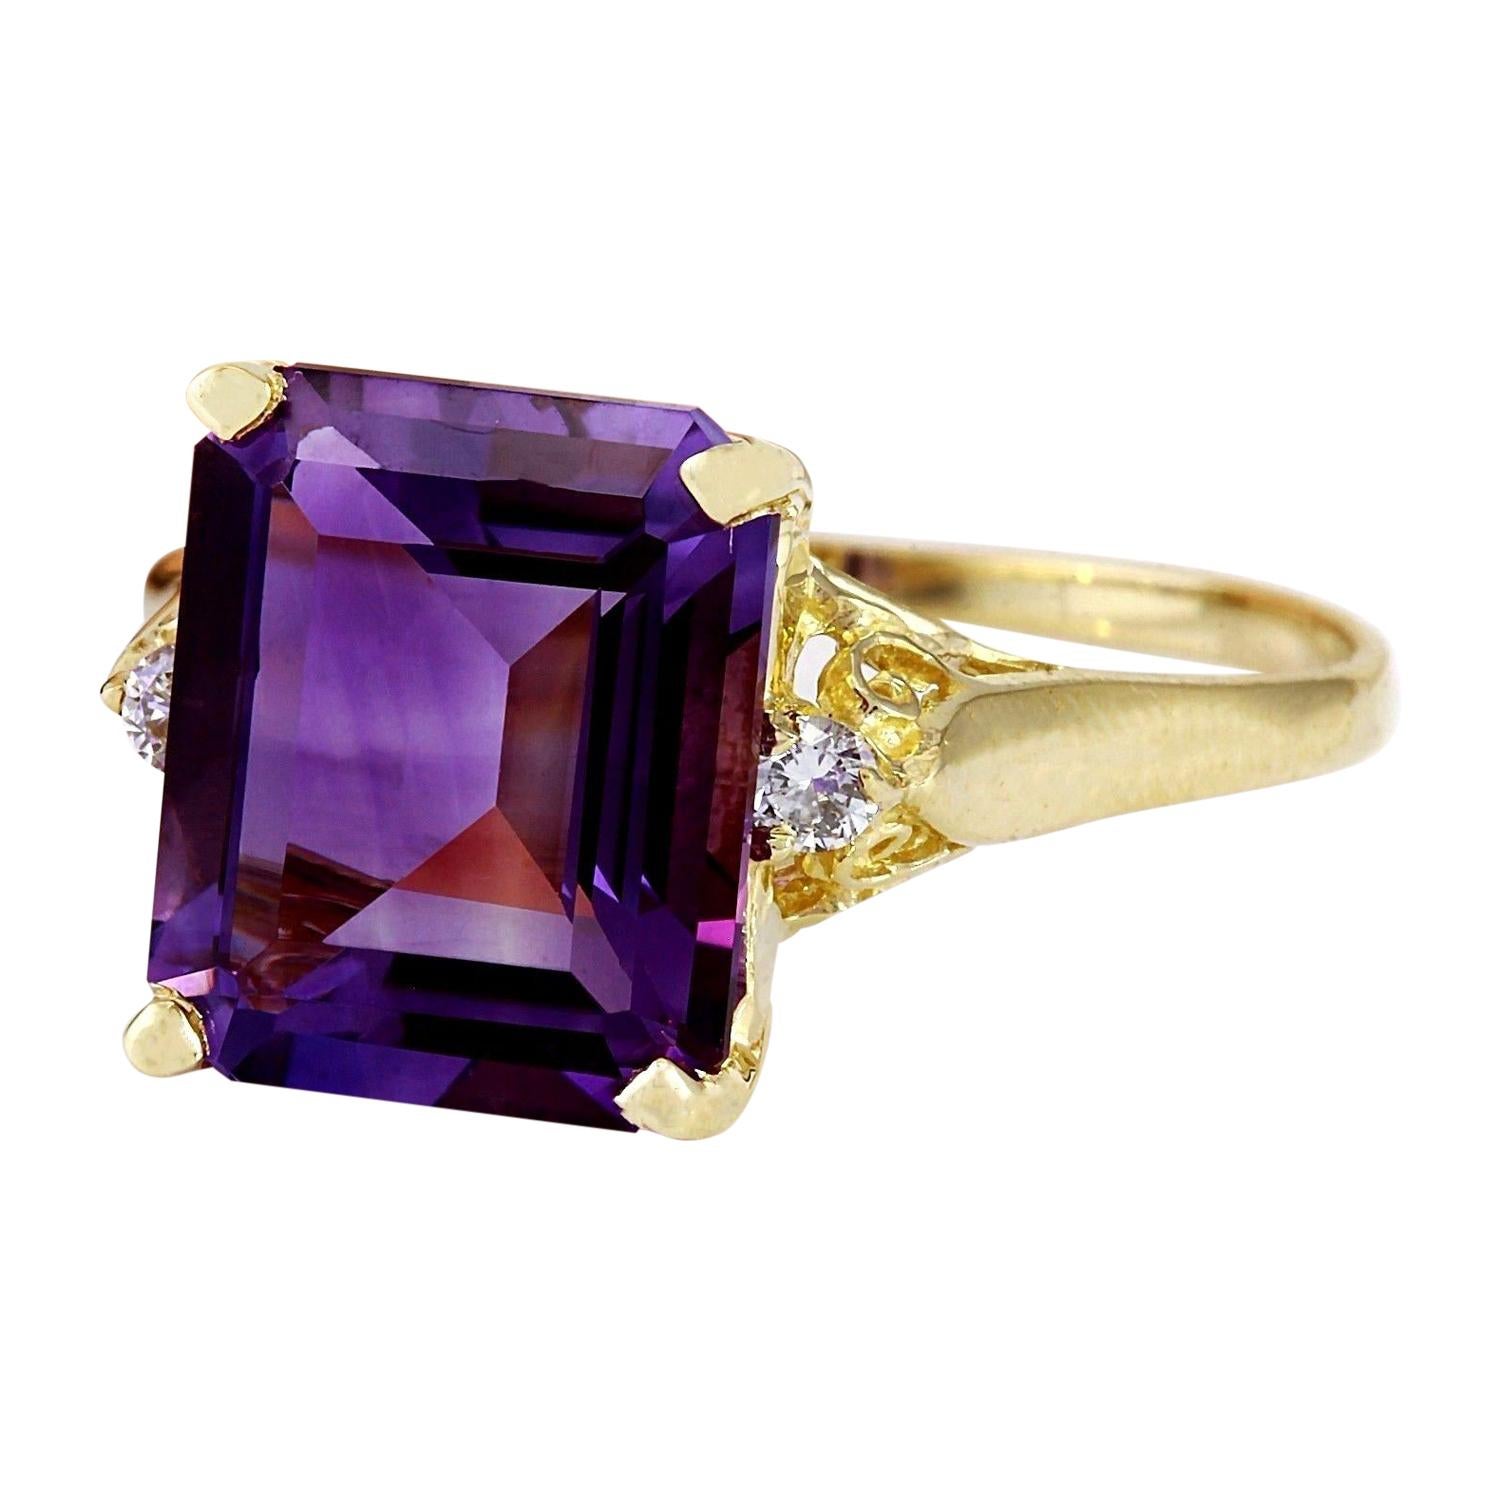 5.14 Carat Natural Amethyst 14K Solid Yellow Gold Diamond Ring
 Item Type: Ring
 Item Style: Cocktail
 Material: 14K Yellow Gold
 Mainstone: Amethyst
 Stone Color: Purple
 Stone Weight: 5.02 Carat
 Stone Shape: Emerald
 Stone Quantity: 1
 Stone